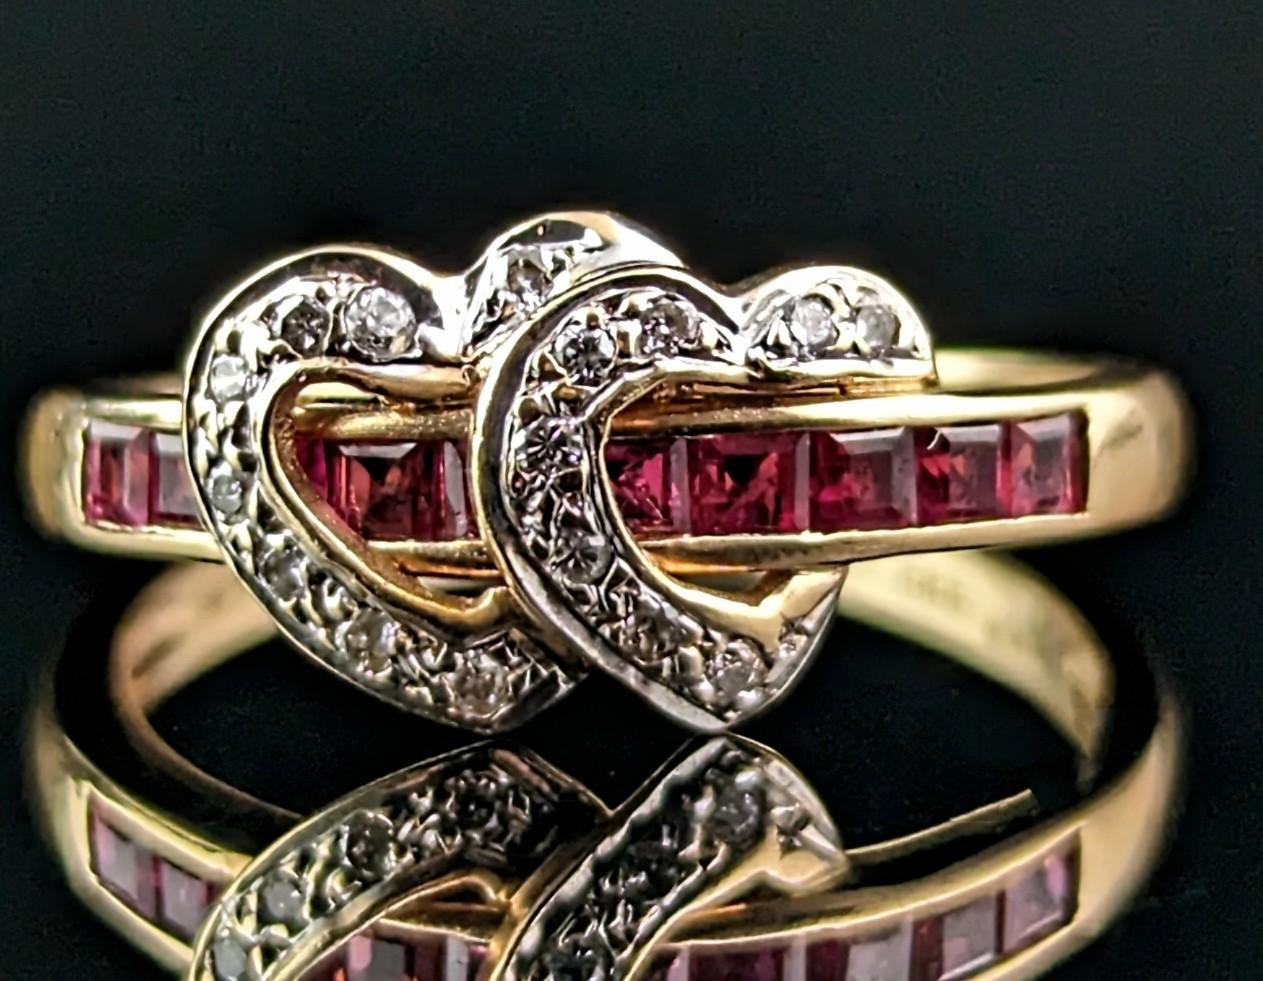 How sweet is this vintage Ruby and Diamond double love heart ring?!

The ring has a half eternity style with caliber cut rubies channel set to the front with two interlocking diamond set love hearts looped over the band.

A truly beautiful piece